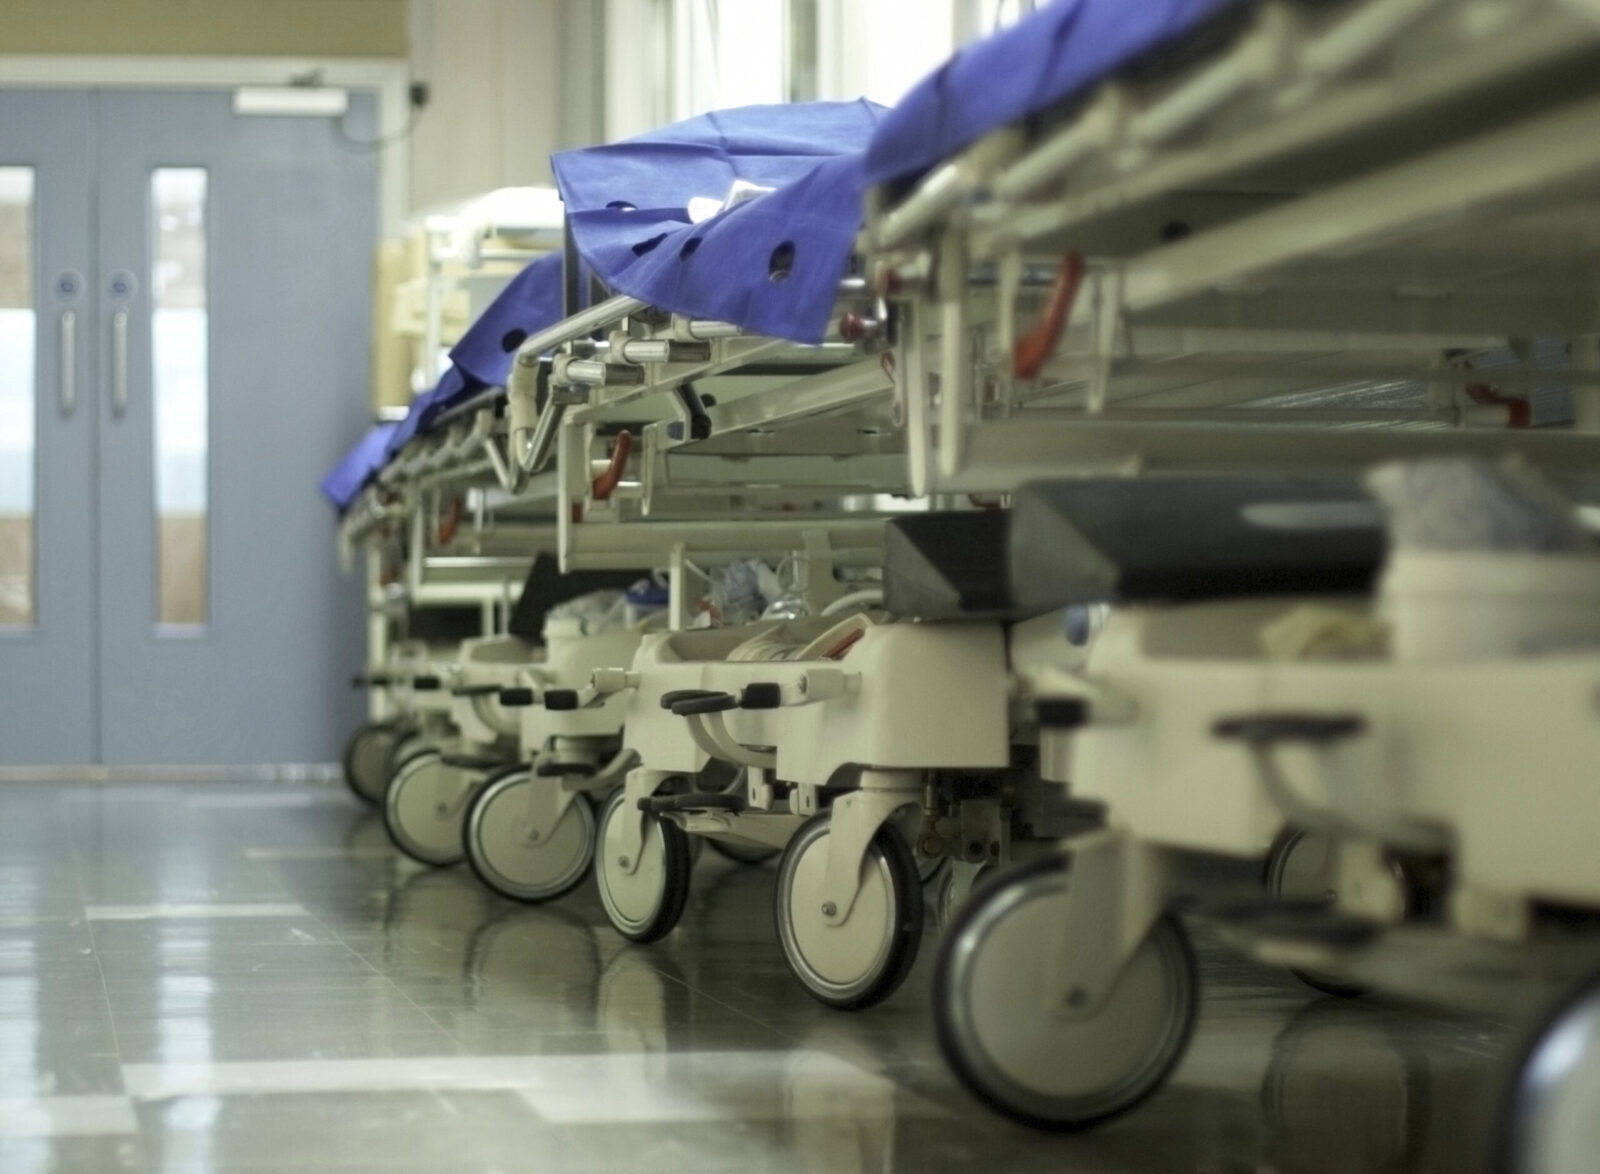 Hospital beds stacked in corridors due to lack of space and long waiting lists